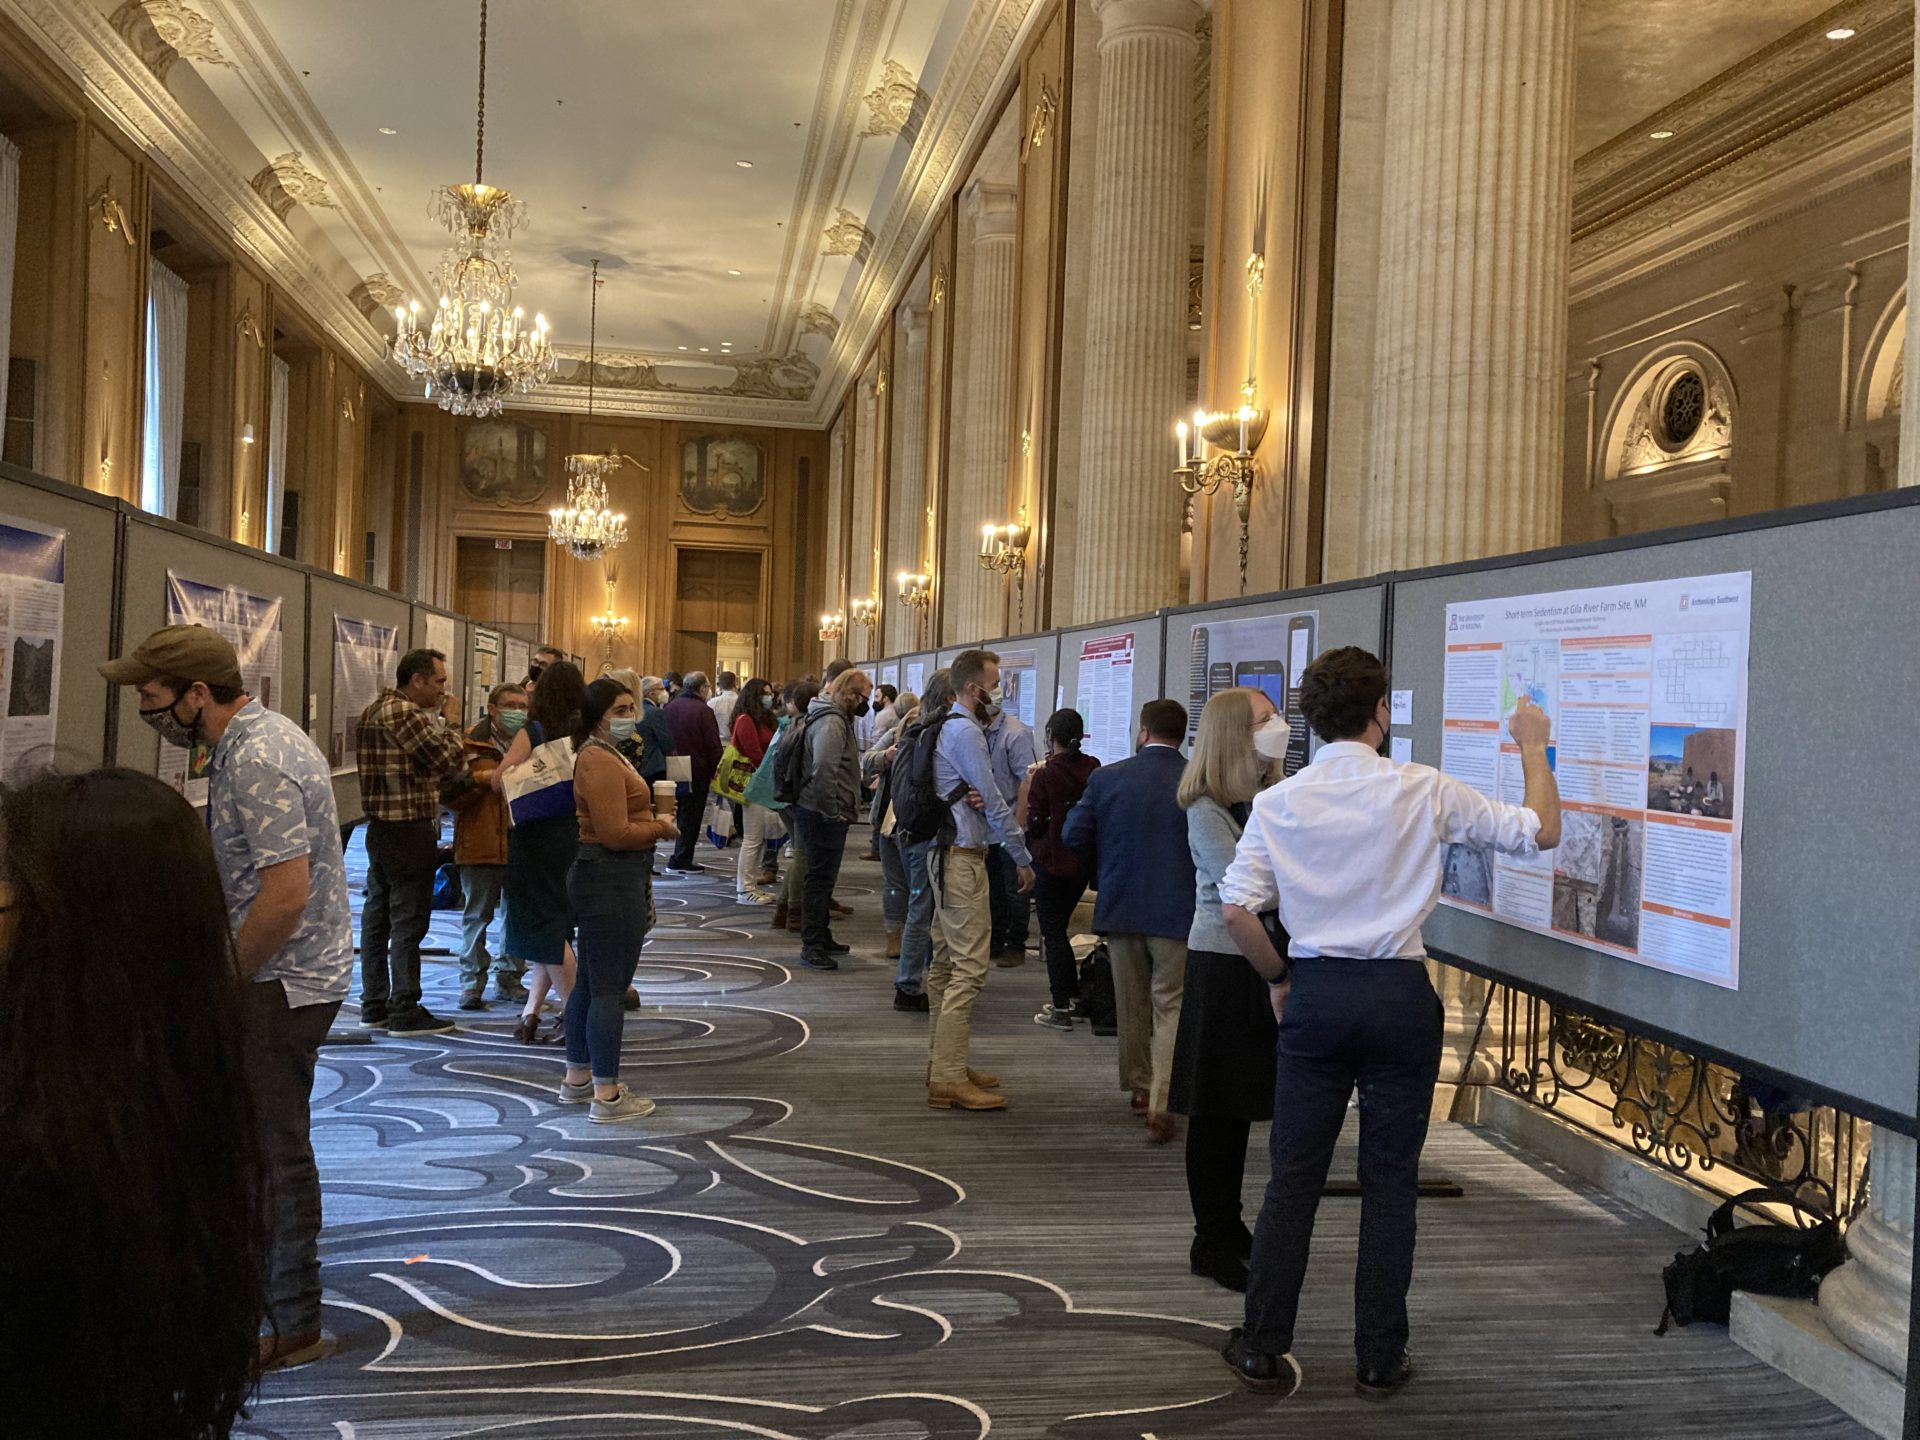 A busy afternoon at the 2022 SAA meeting poster sessions.